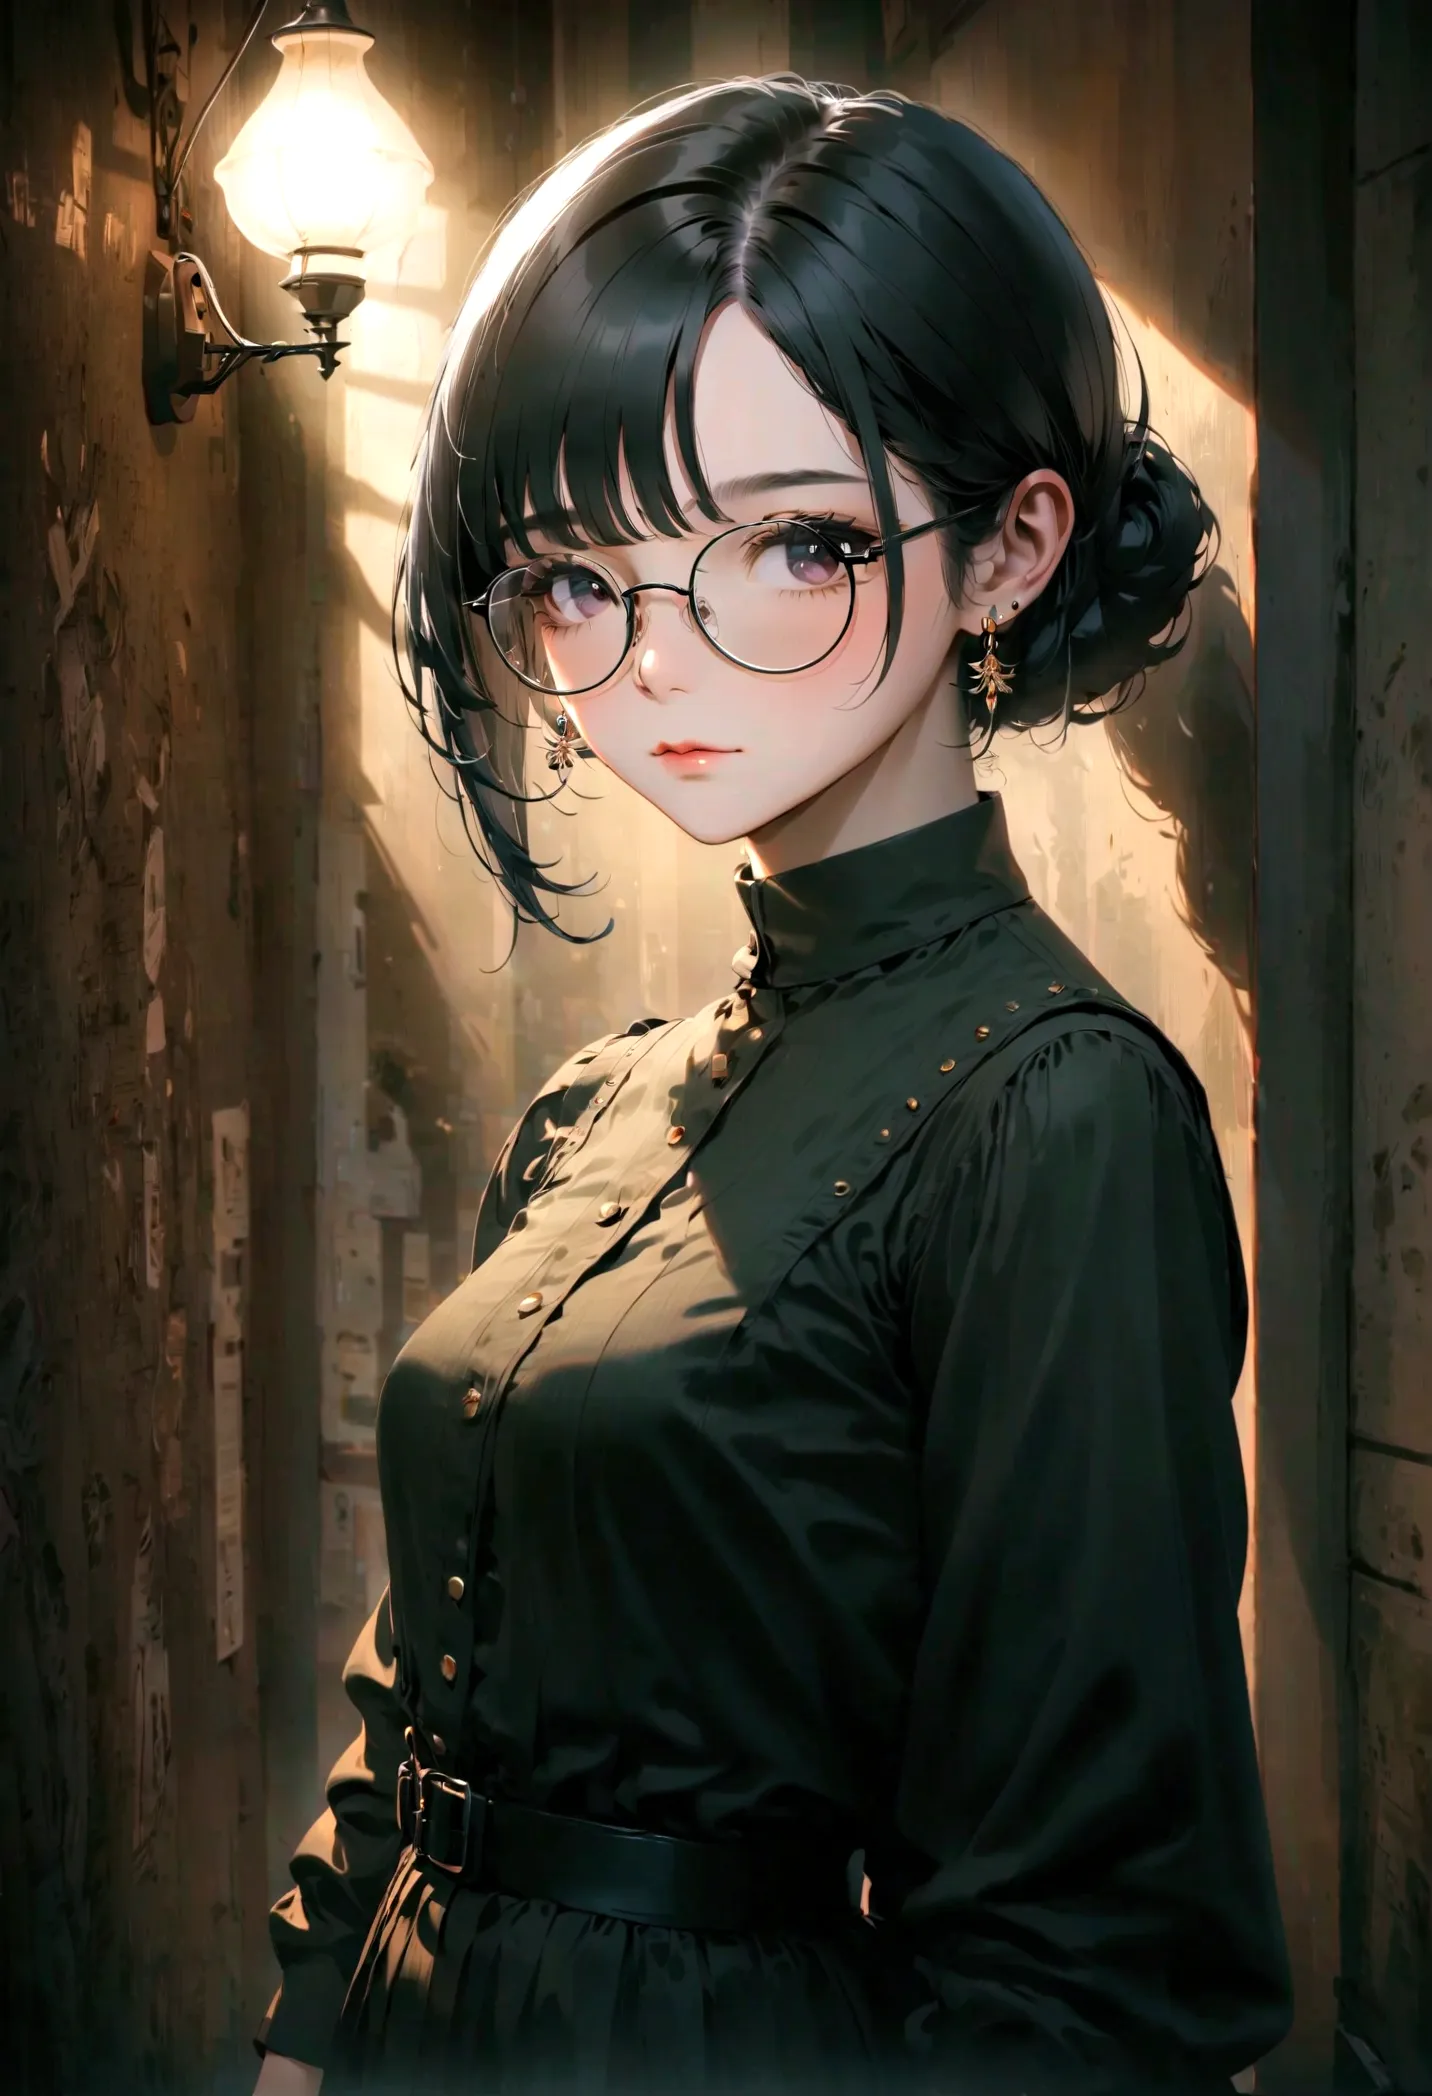 A captivating portrait of a young woman with striking black hair, stylish glasses, and delicate stud earrings, exuding a vintage...